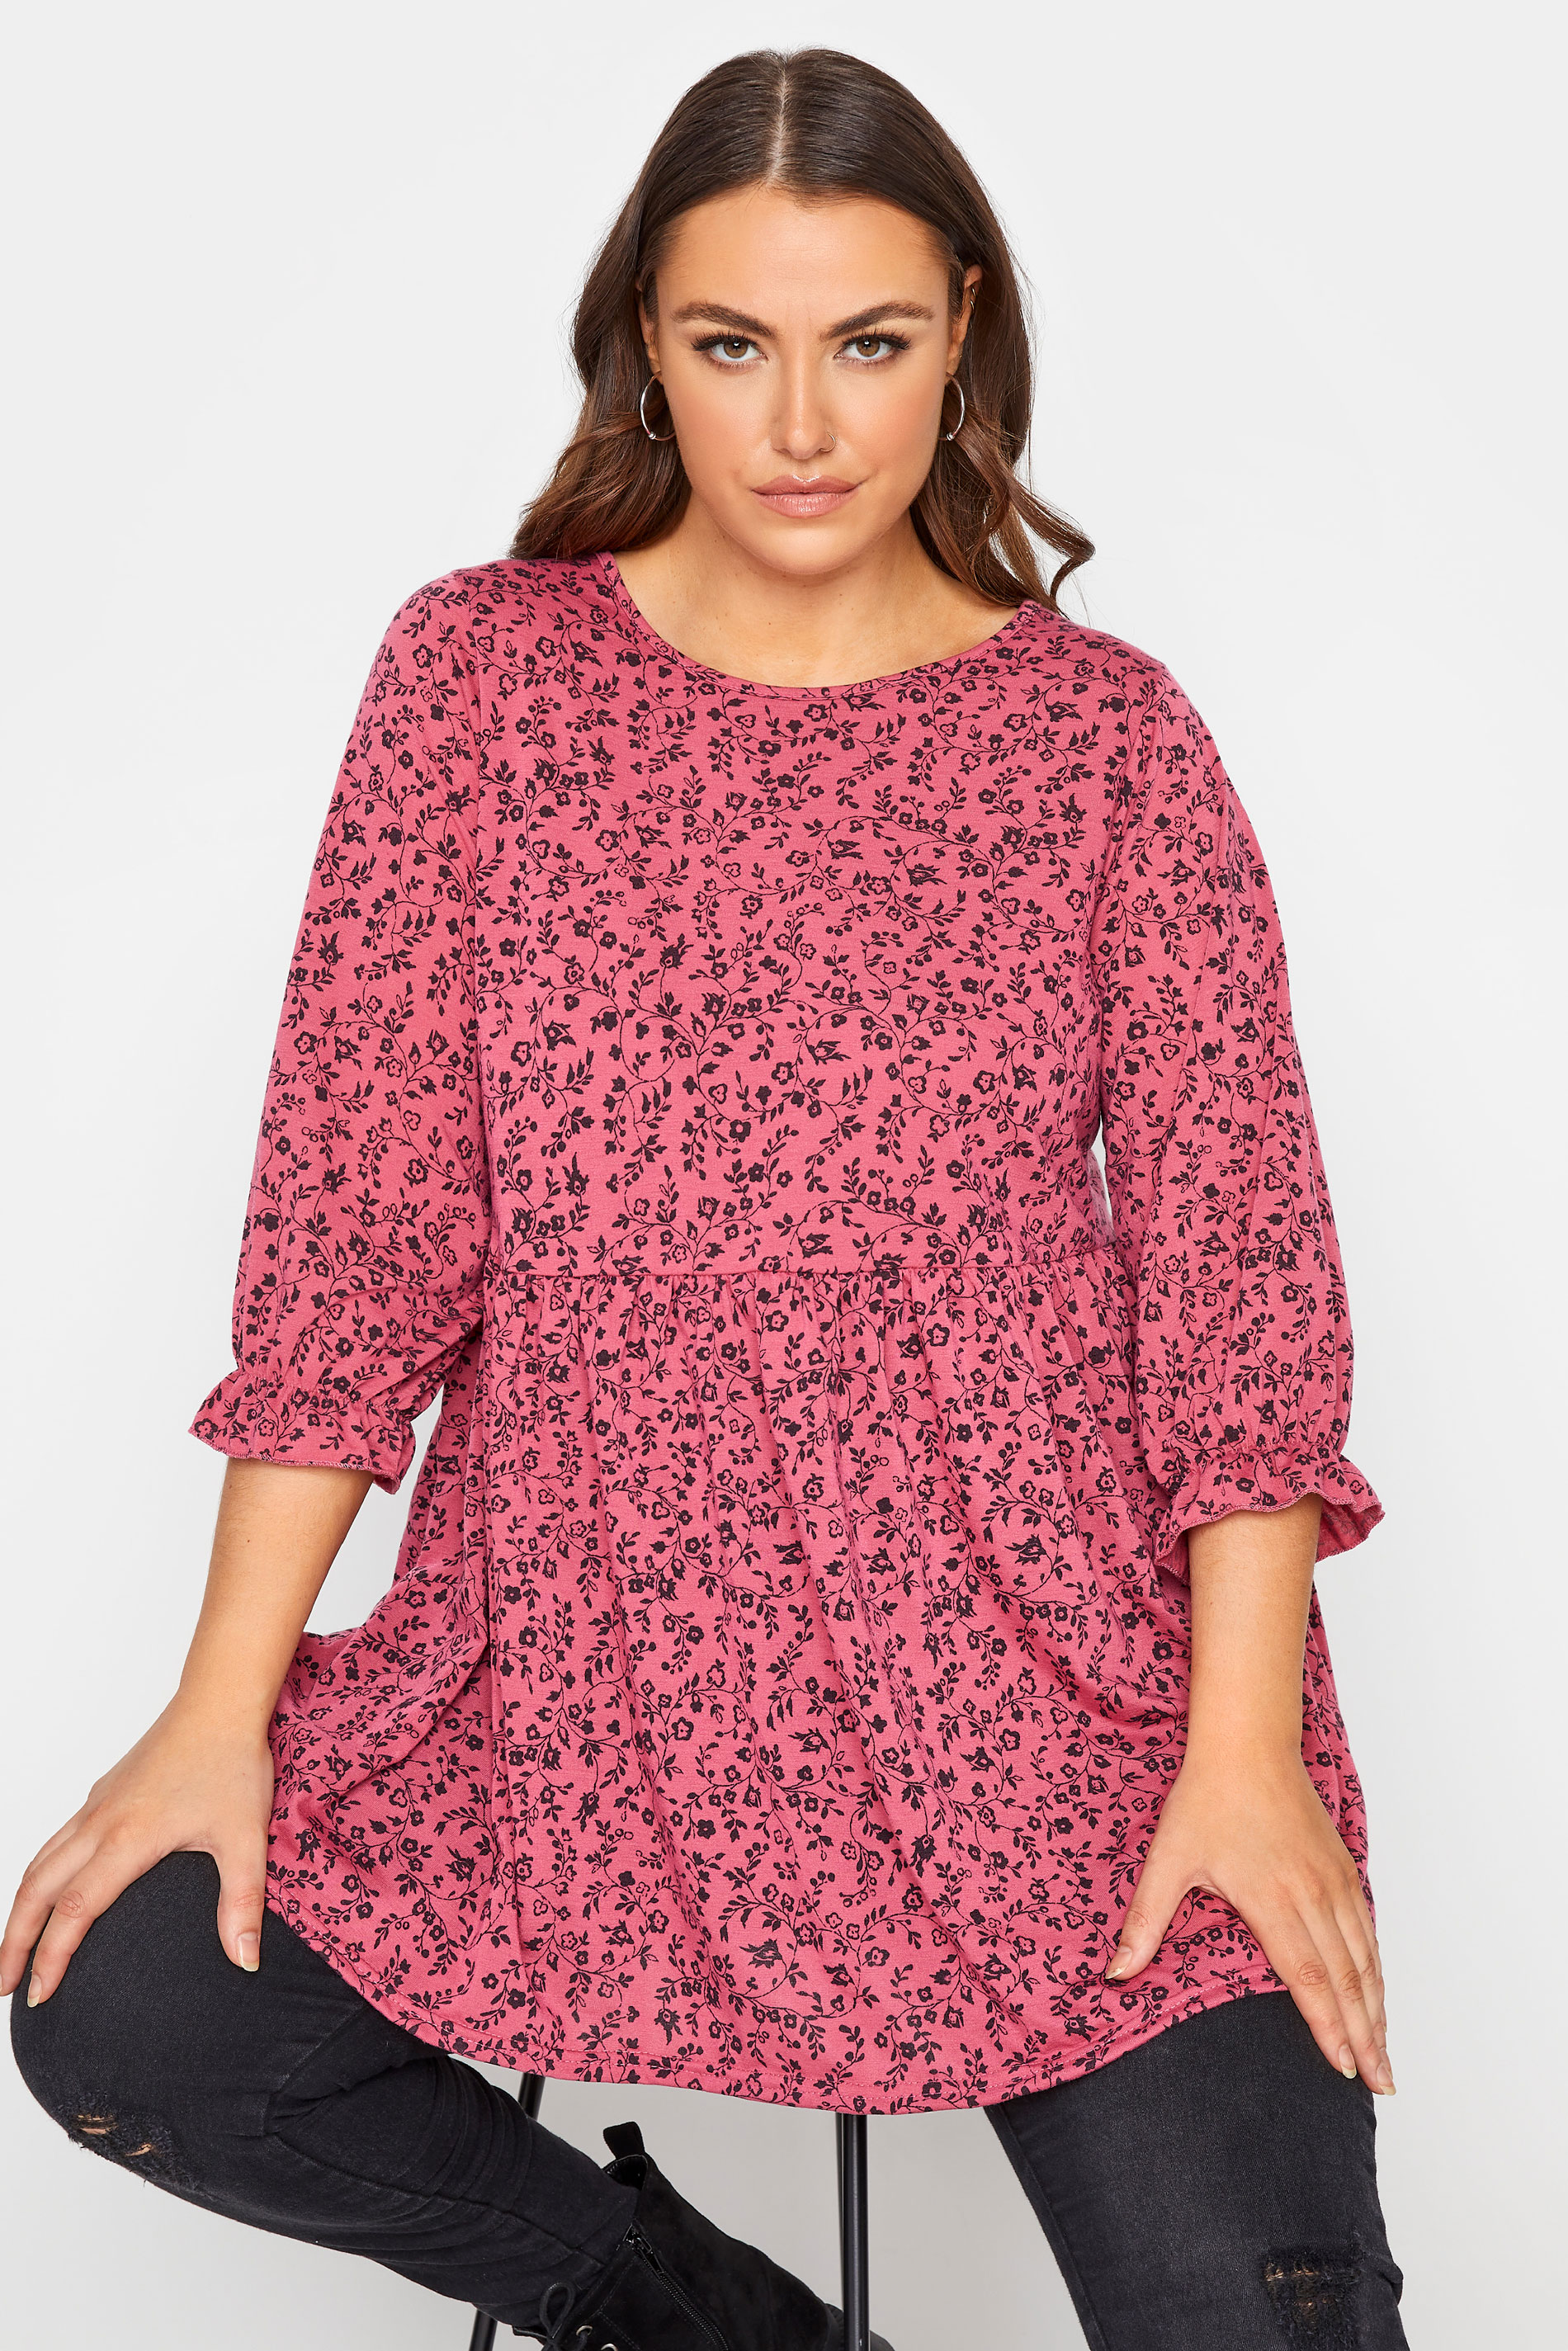 LIMITED COLLECTION Curve Pink Ditsy Print Frill Peplum Top_A.jpg